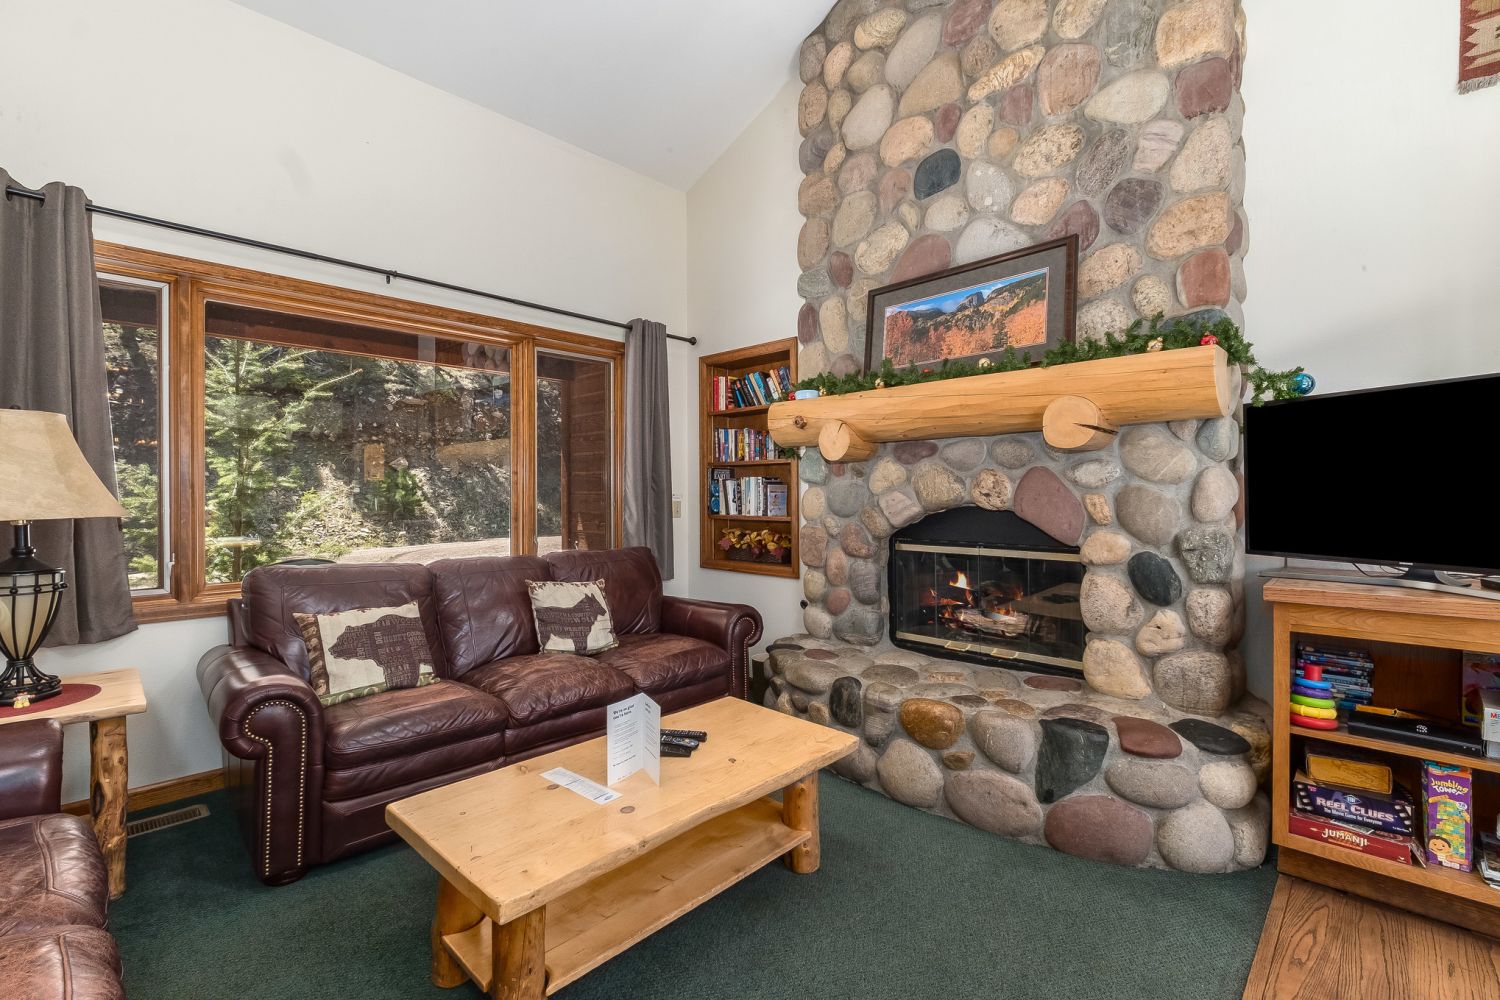 Cascade - Living room with 2 sofas, a flat screen TV and a stone fireplace.